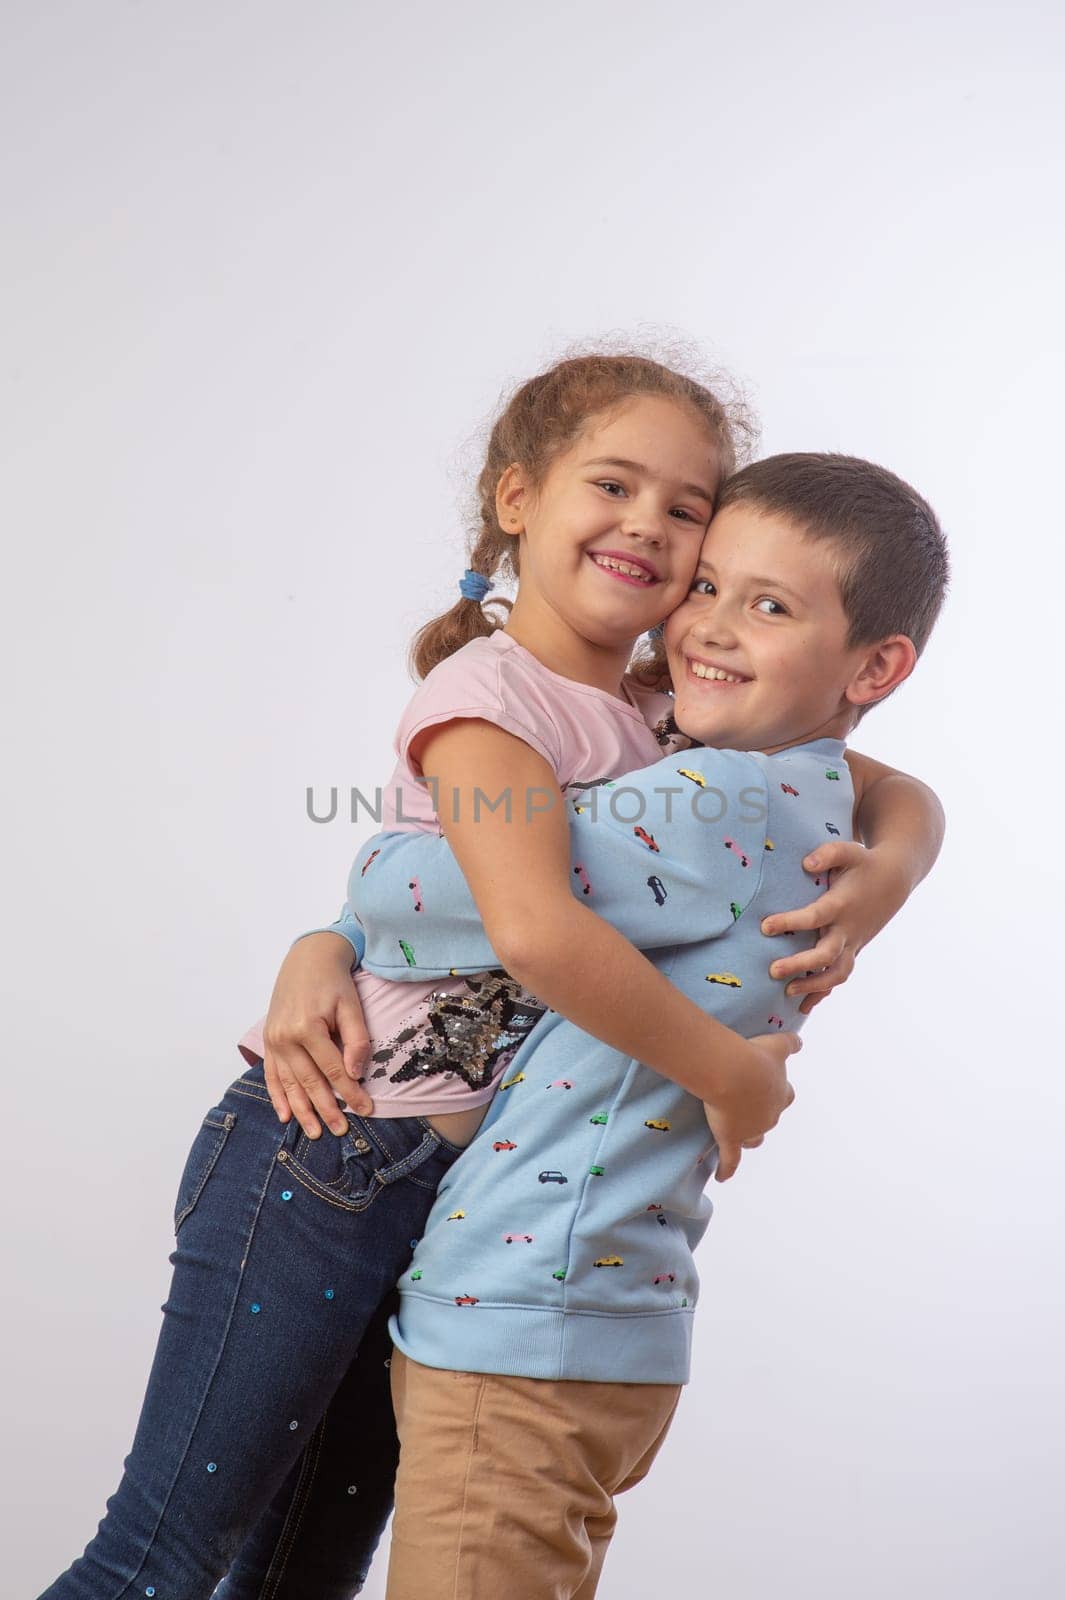 sister hugging brother studio portrait happy family 2 by Mixa74